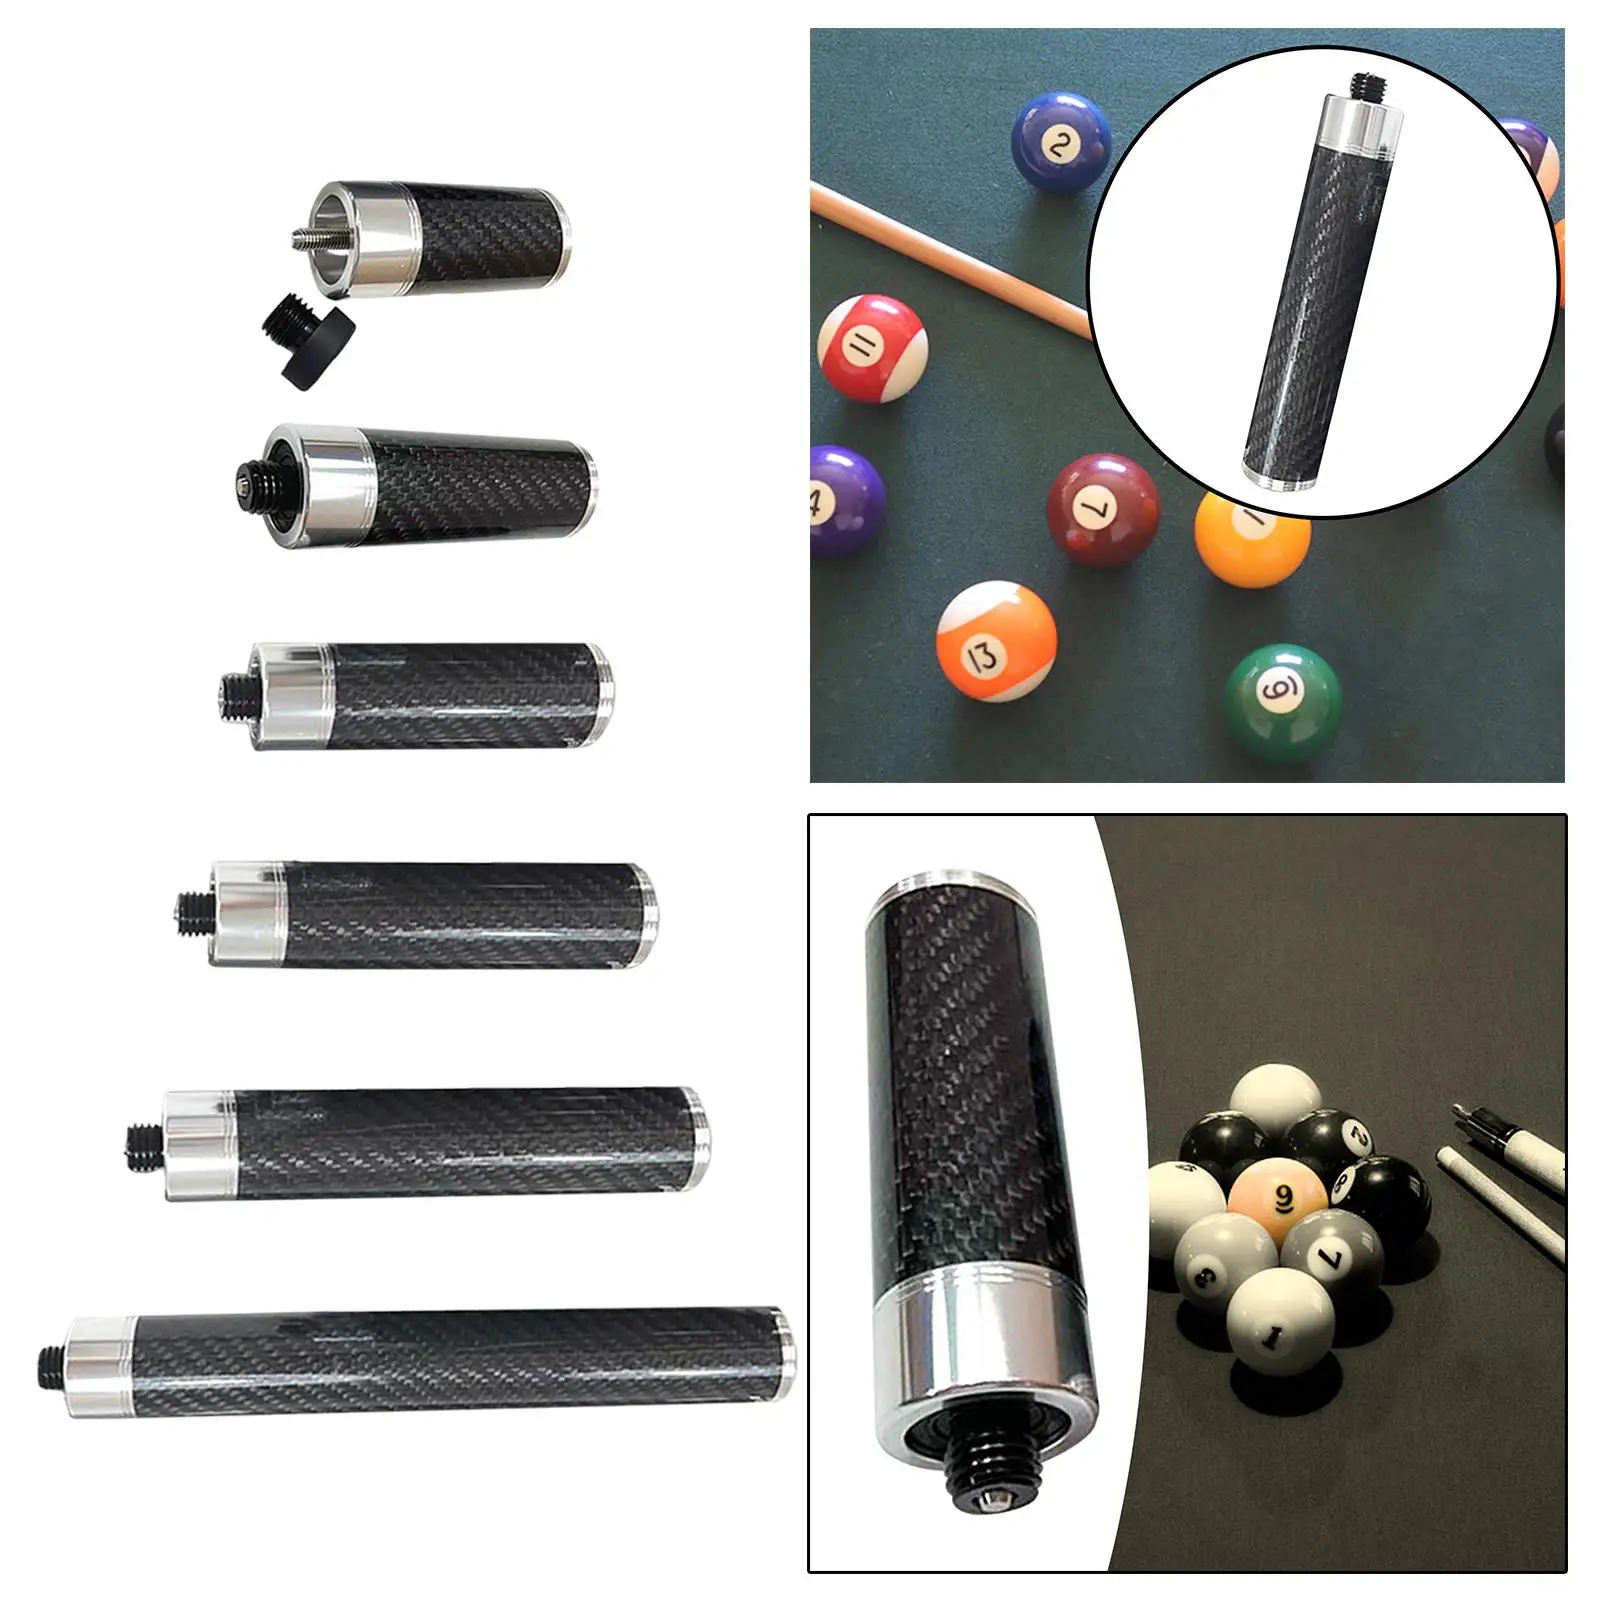 Billiards Pool Cue Extension with Bumper Attachment Cue End Extender Adapter